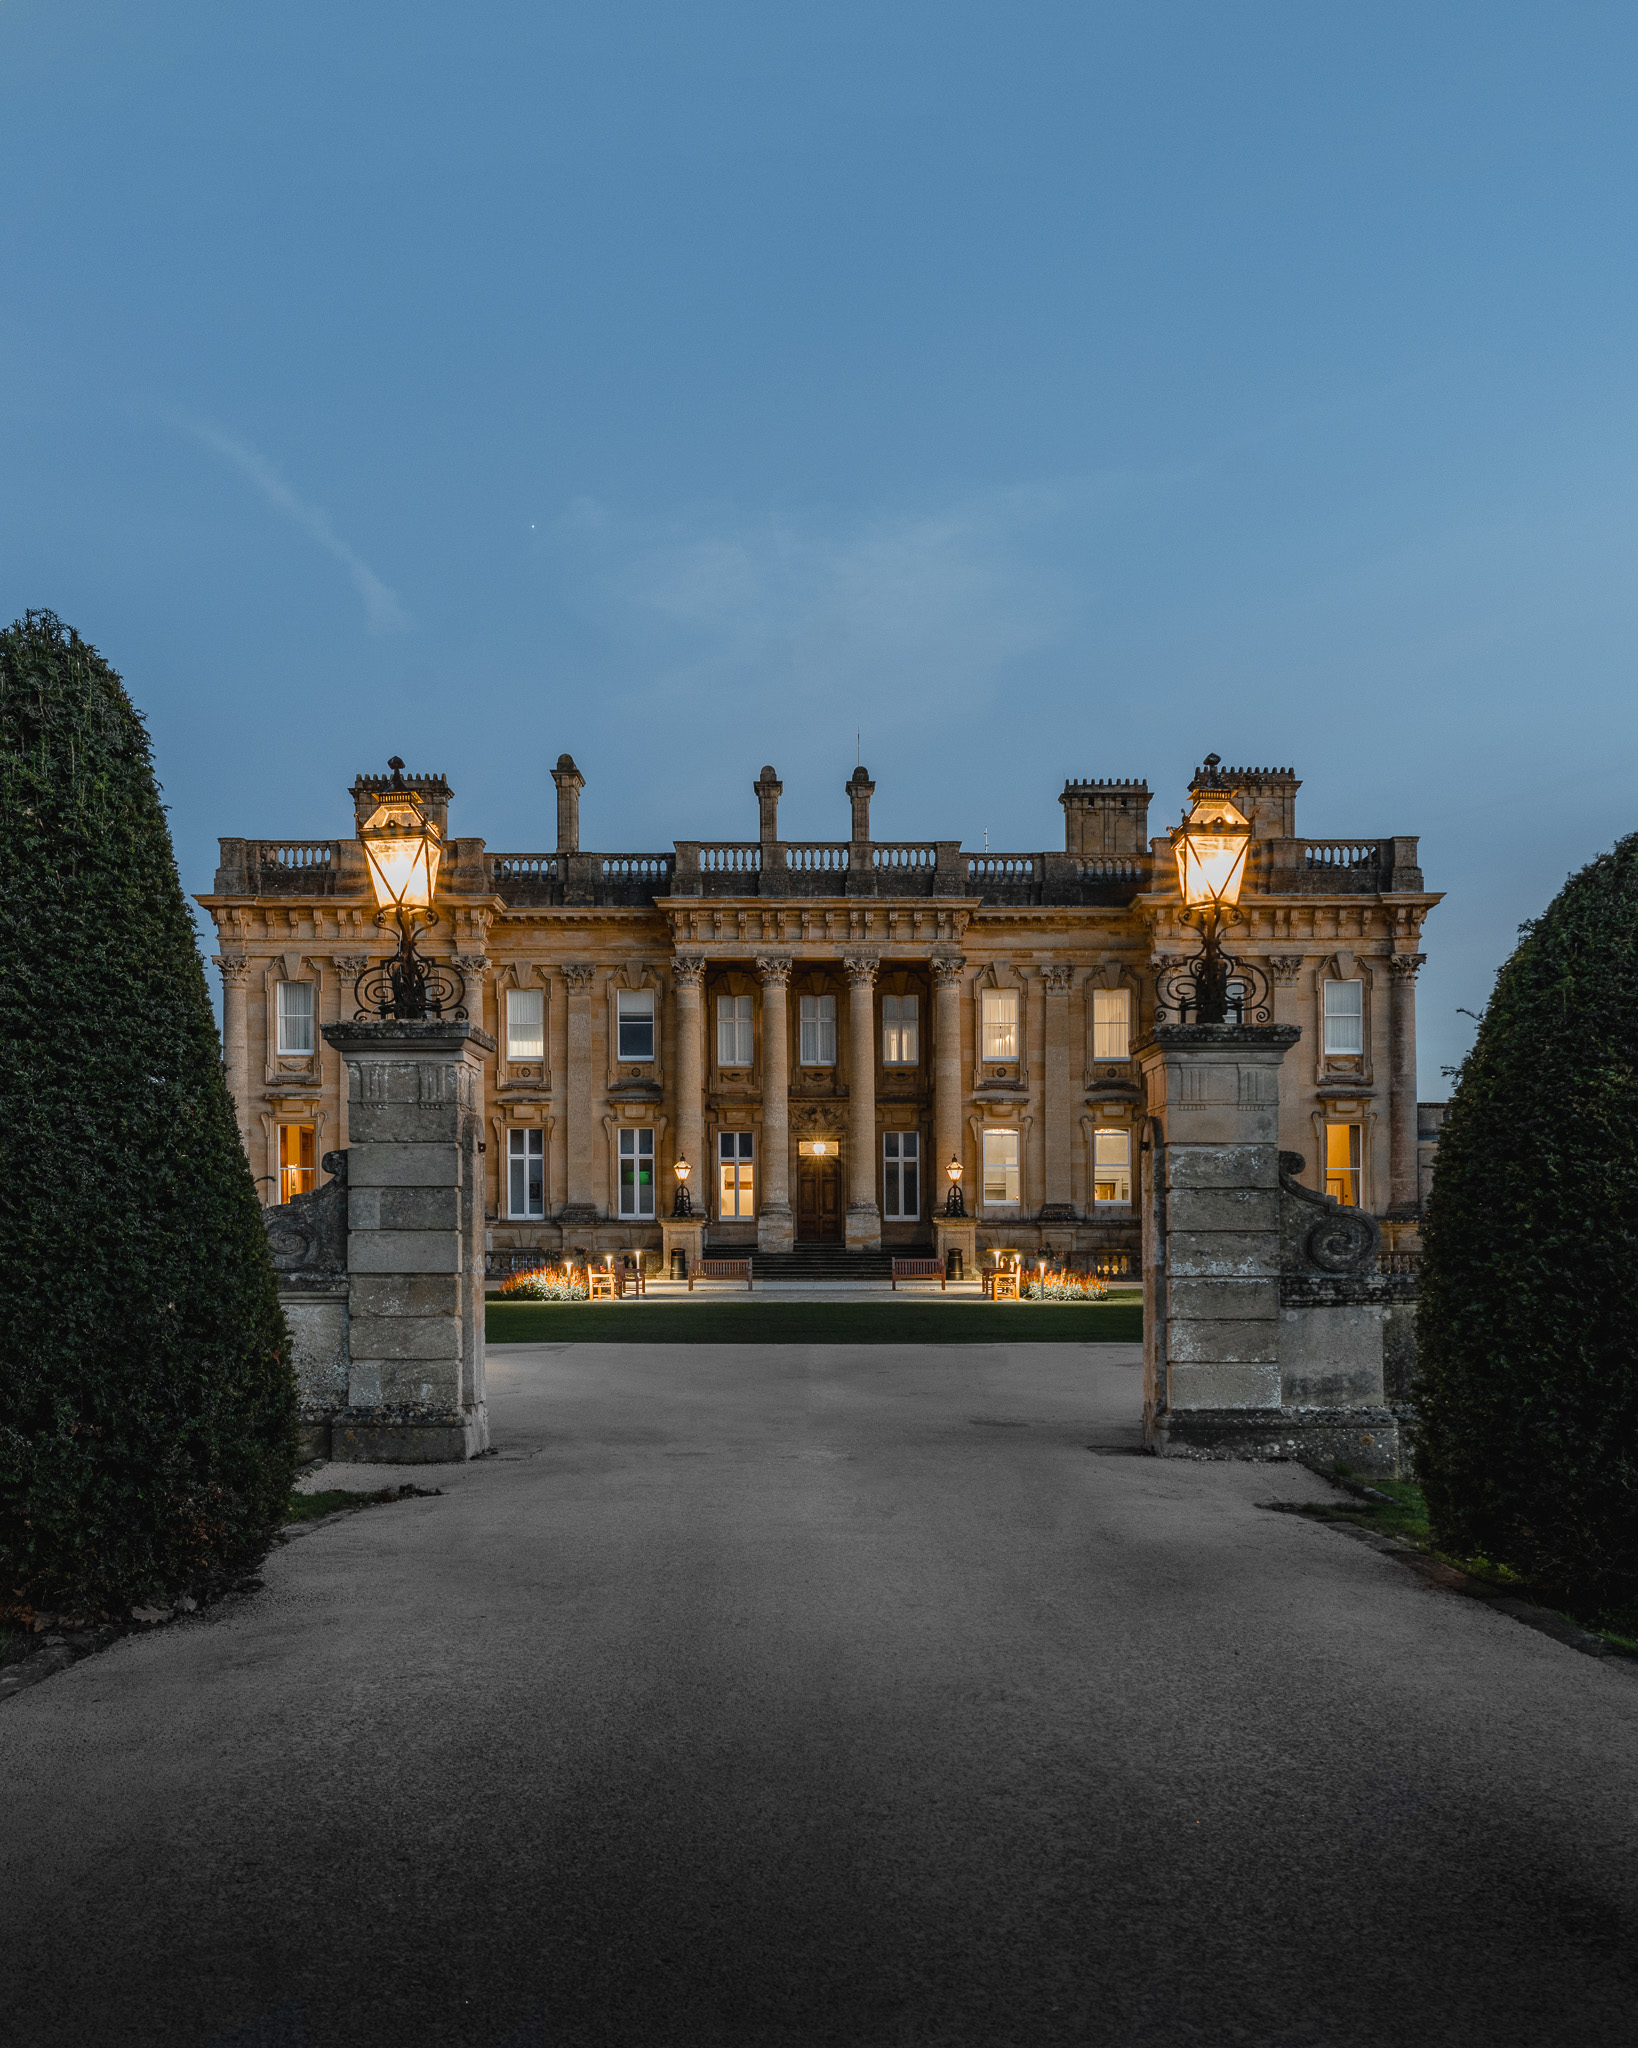 Heythrop Park sits on the edge of the Cotswolds, around five miles from the market town of Chipping Norton